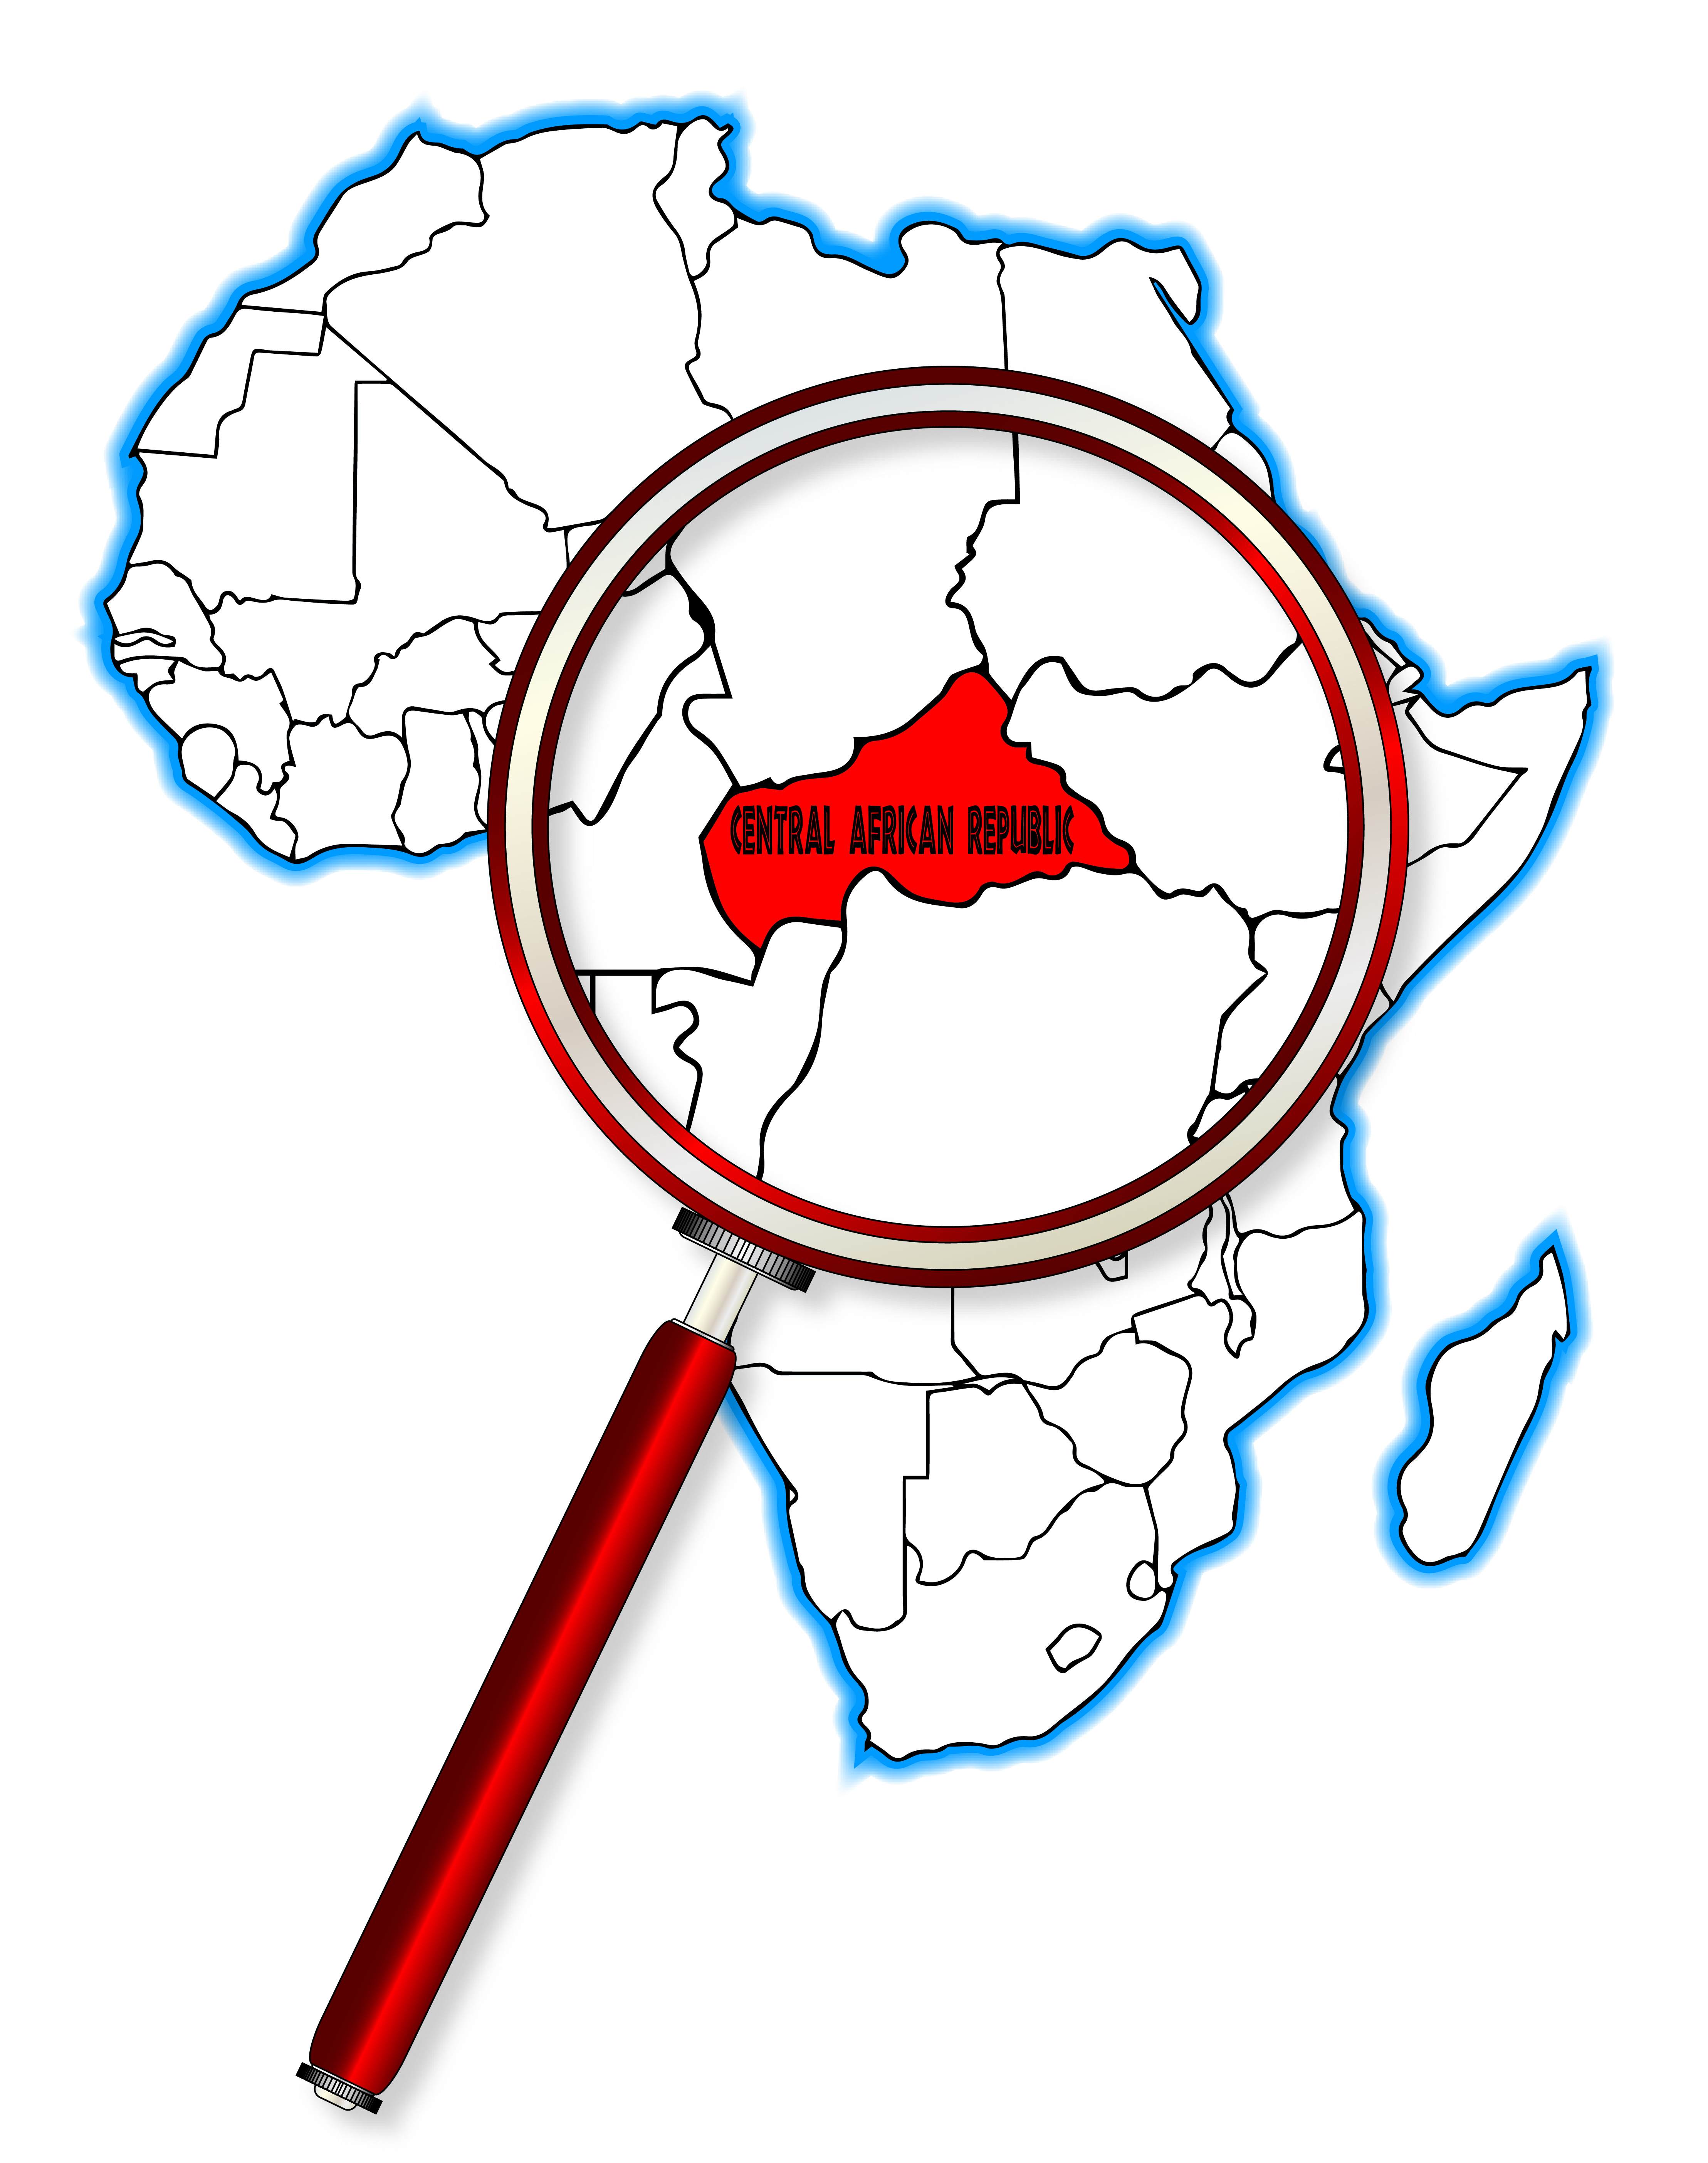 Central African Republic outline inset into a map of Africa over a white background